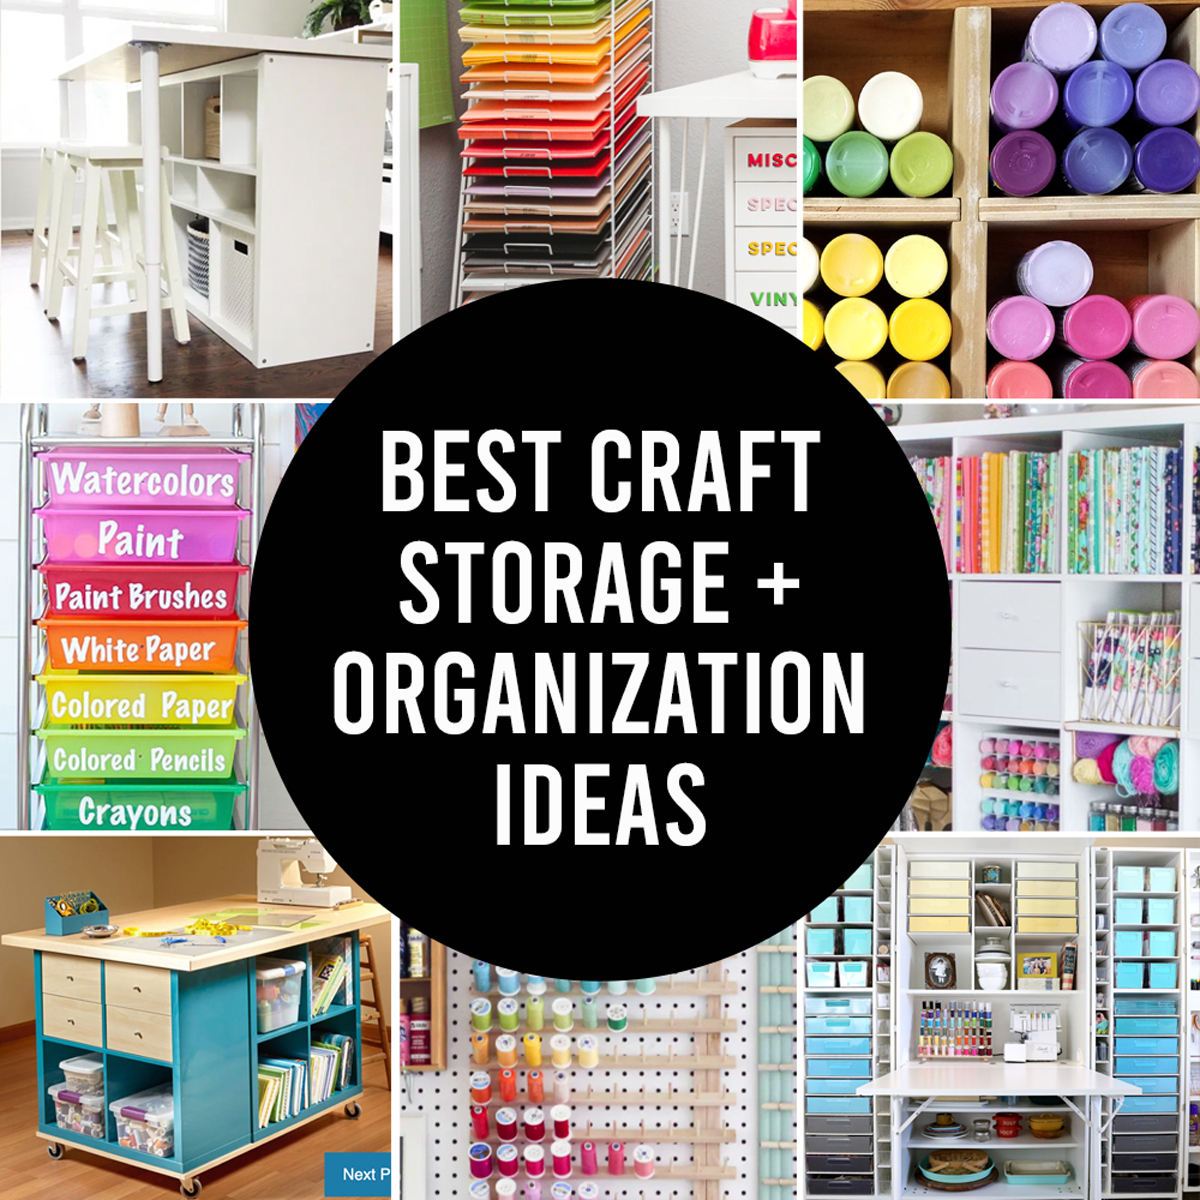 4 Budget Friendly Organization Solutions in My Craft Room - The